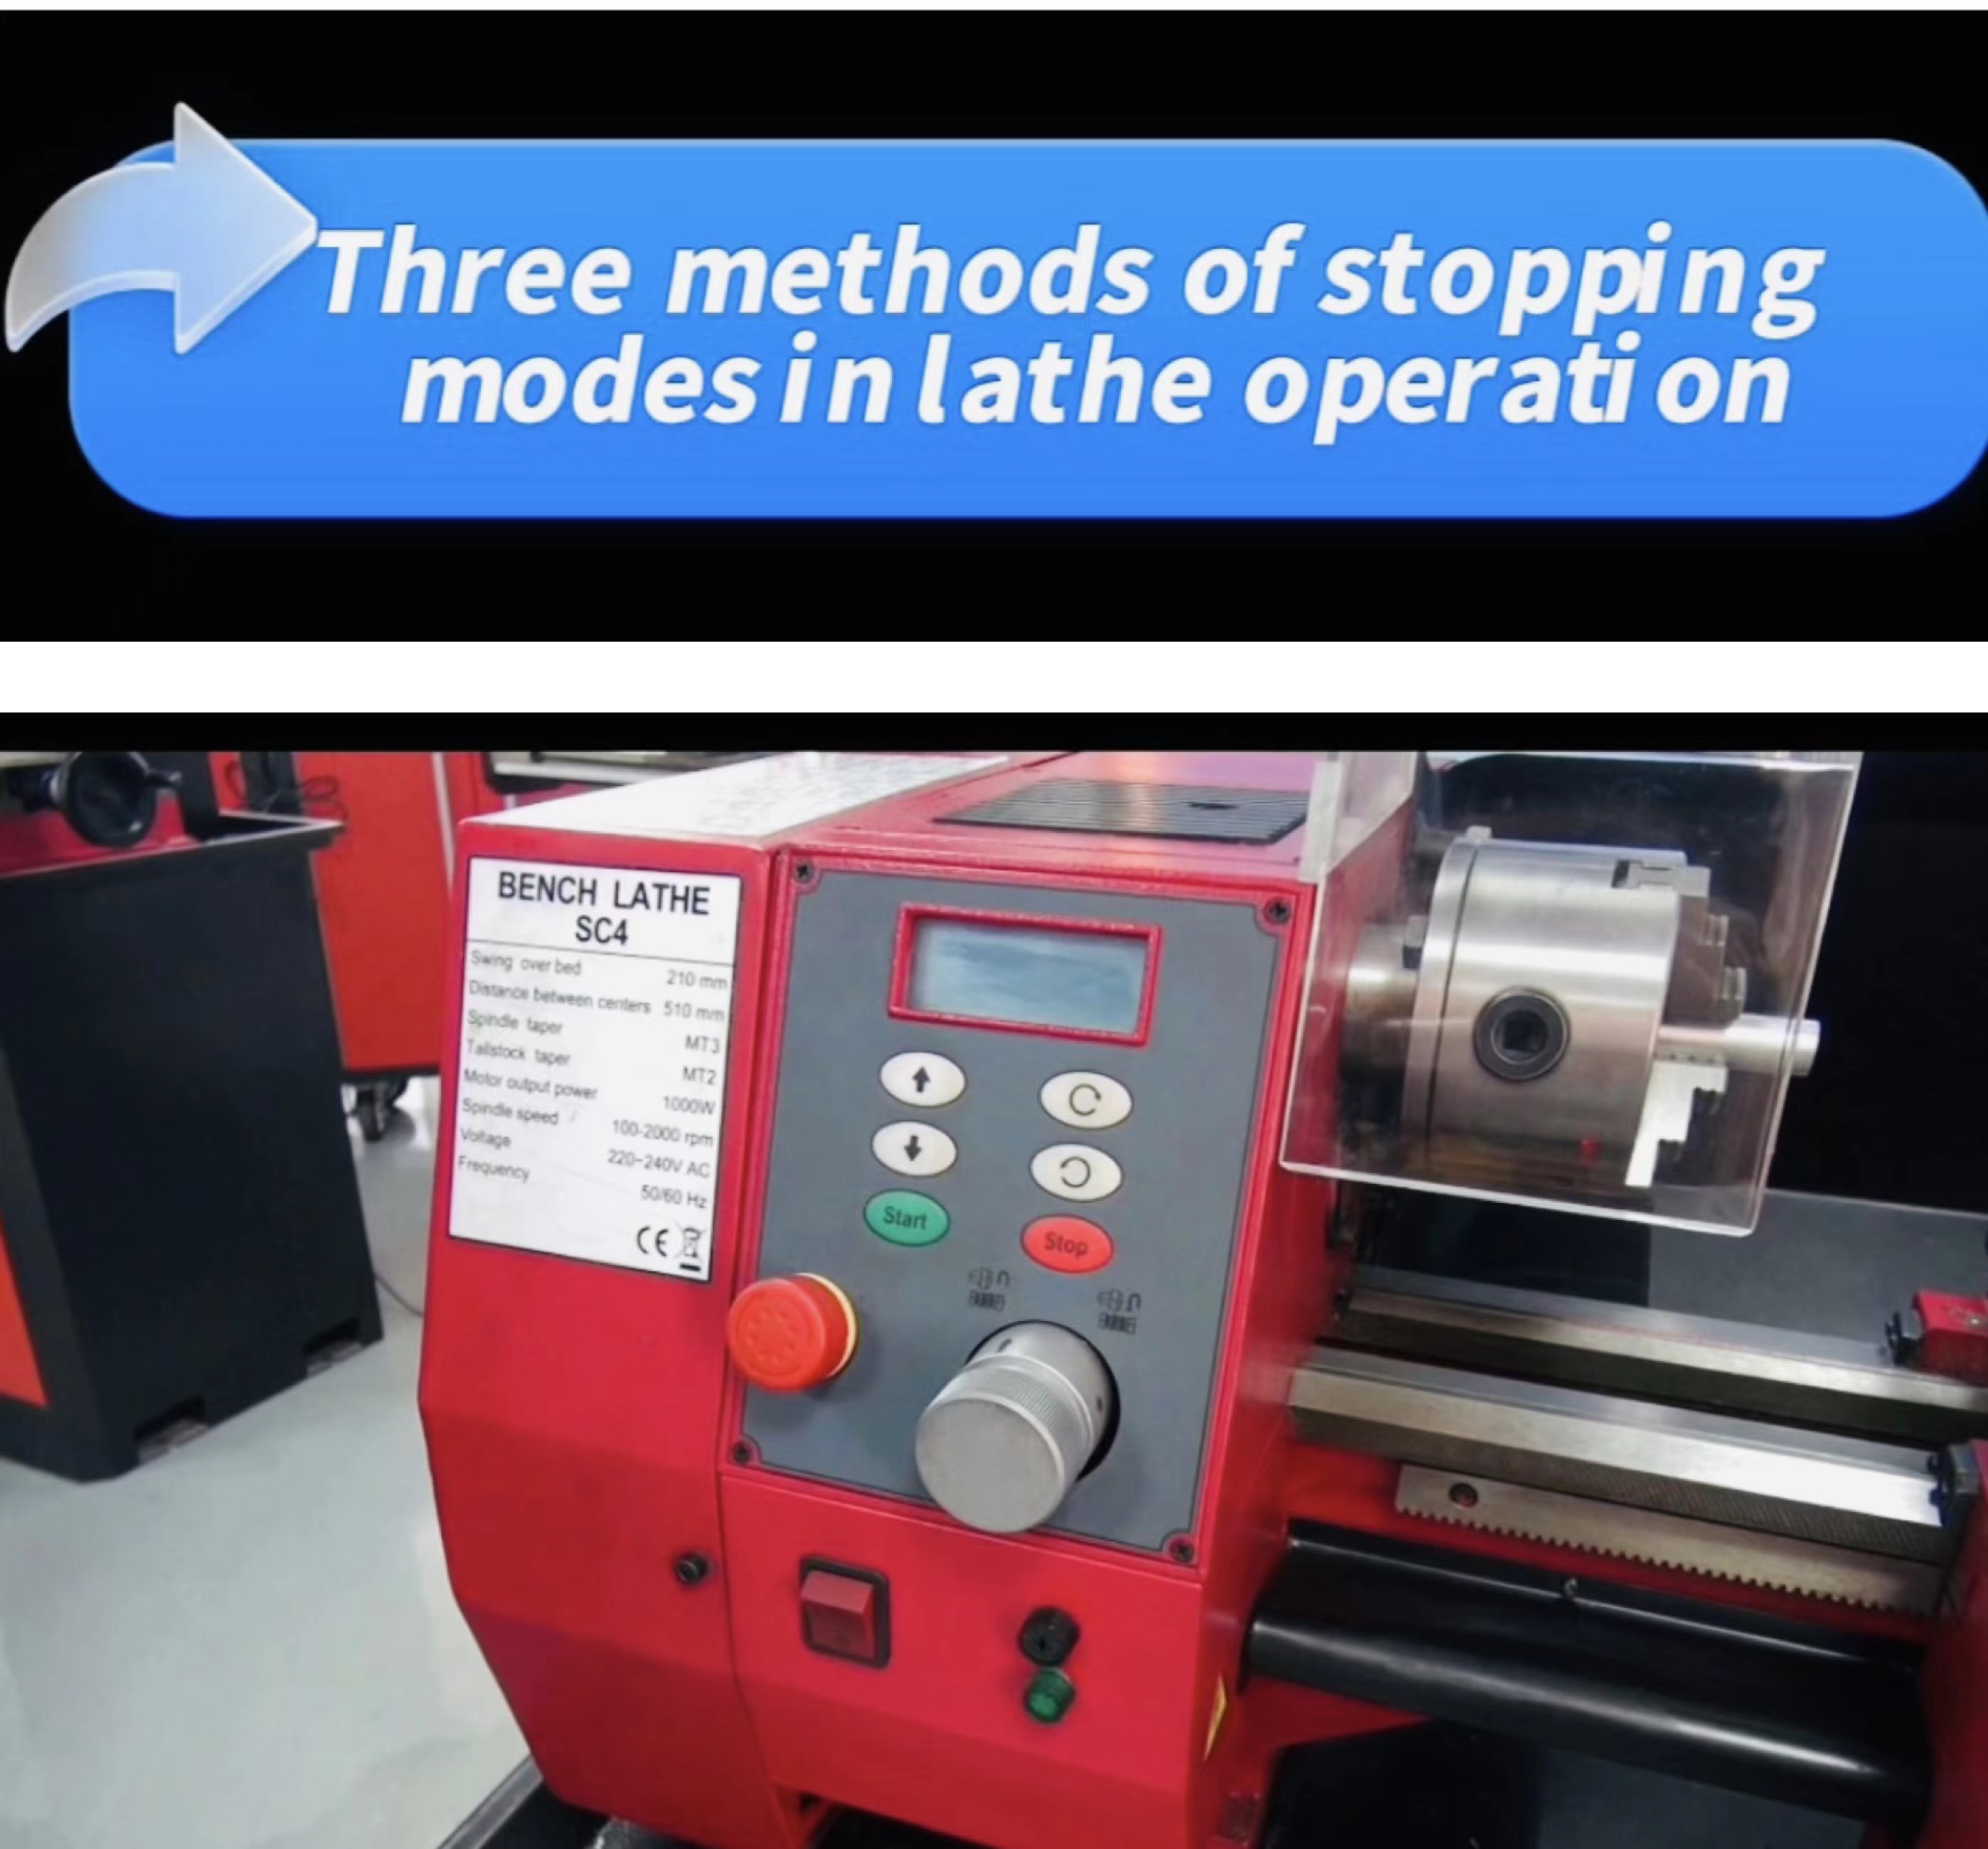 Three methods of stopping modes in lathe operation